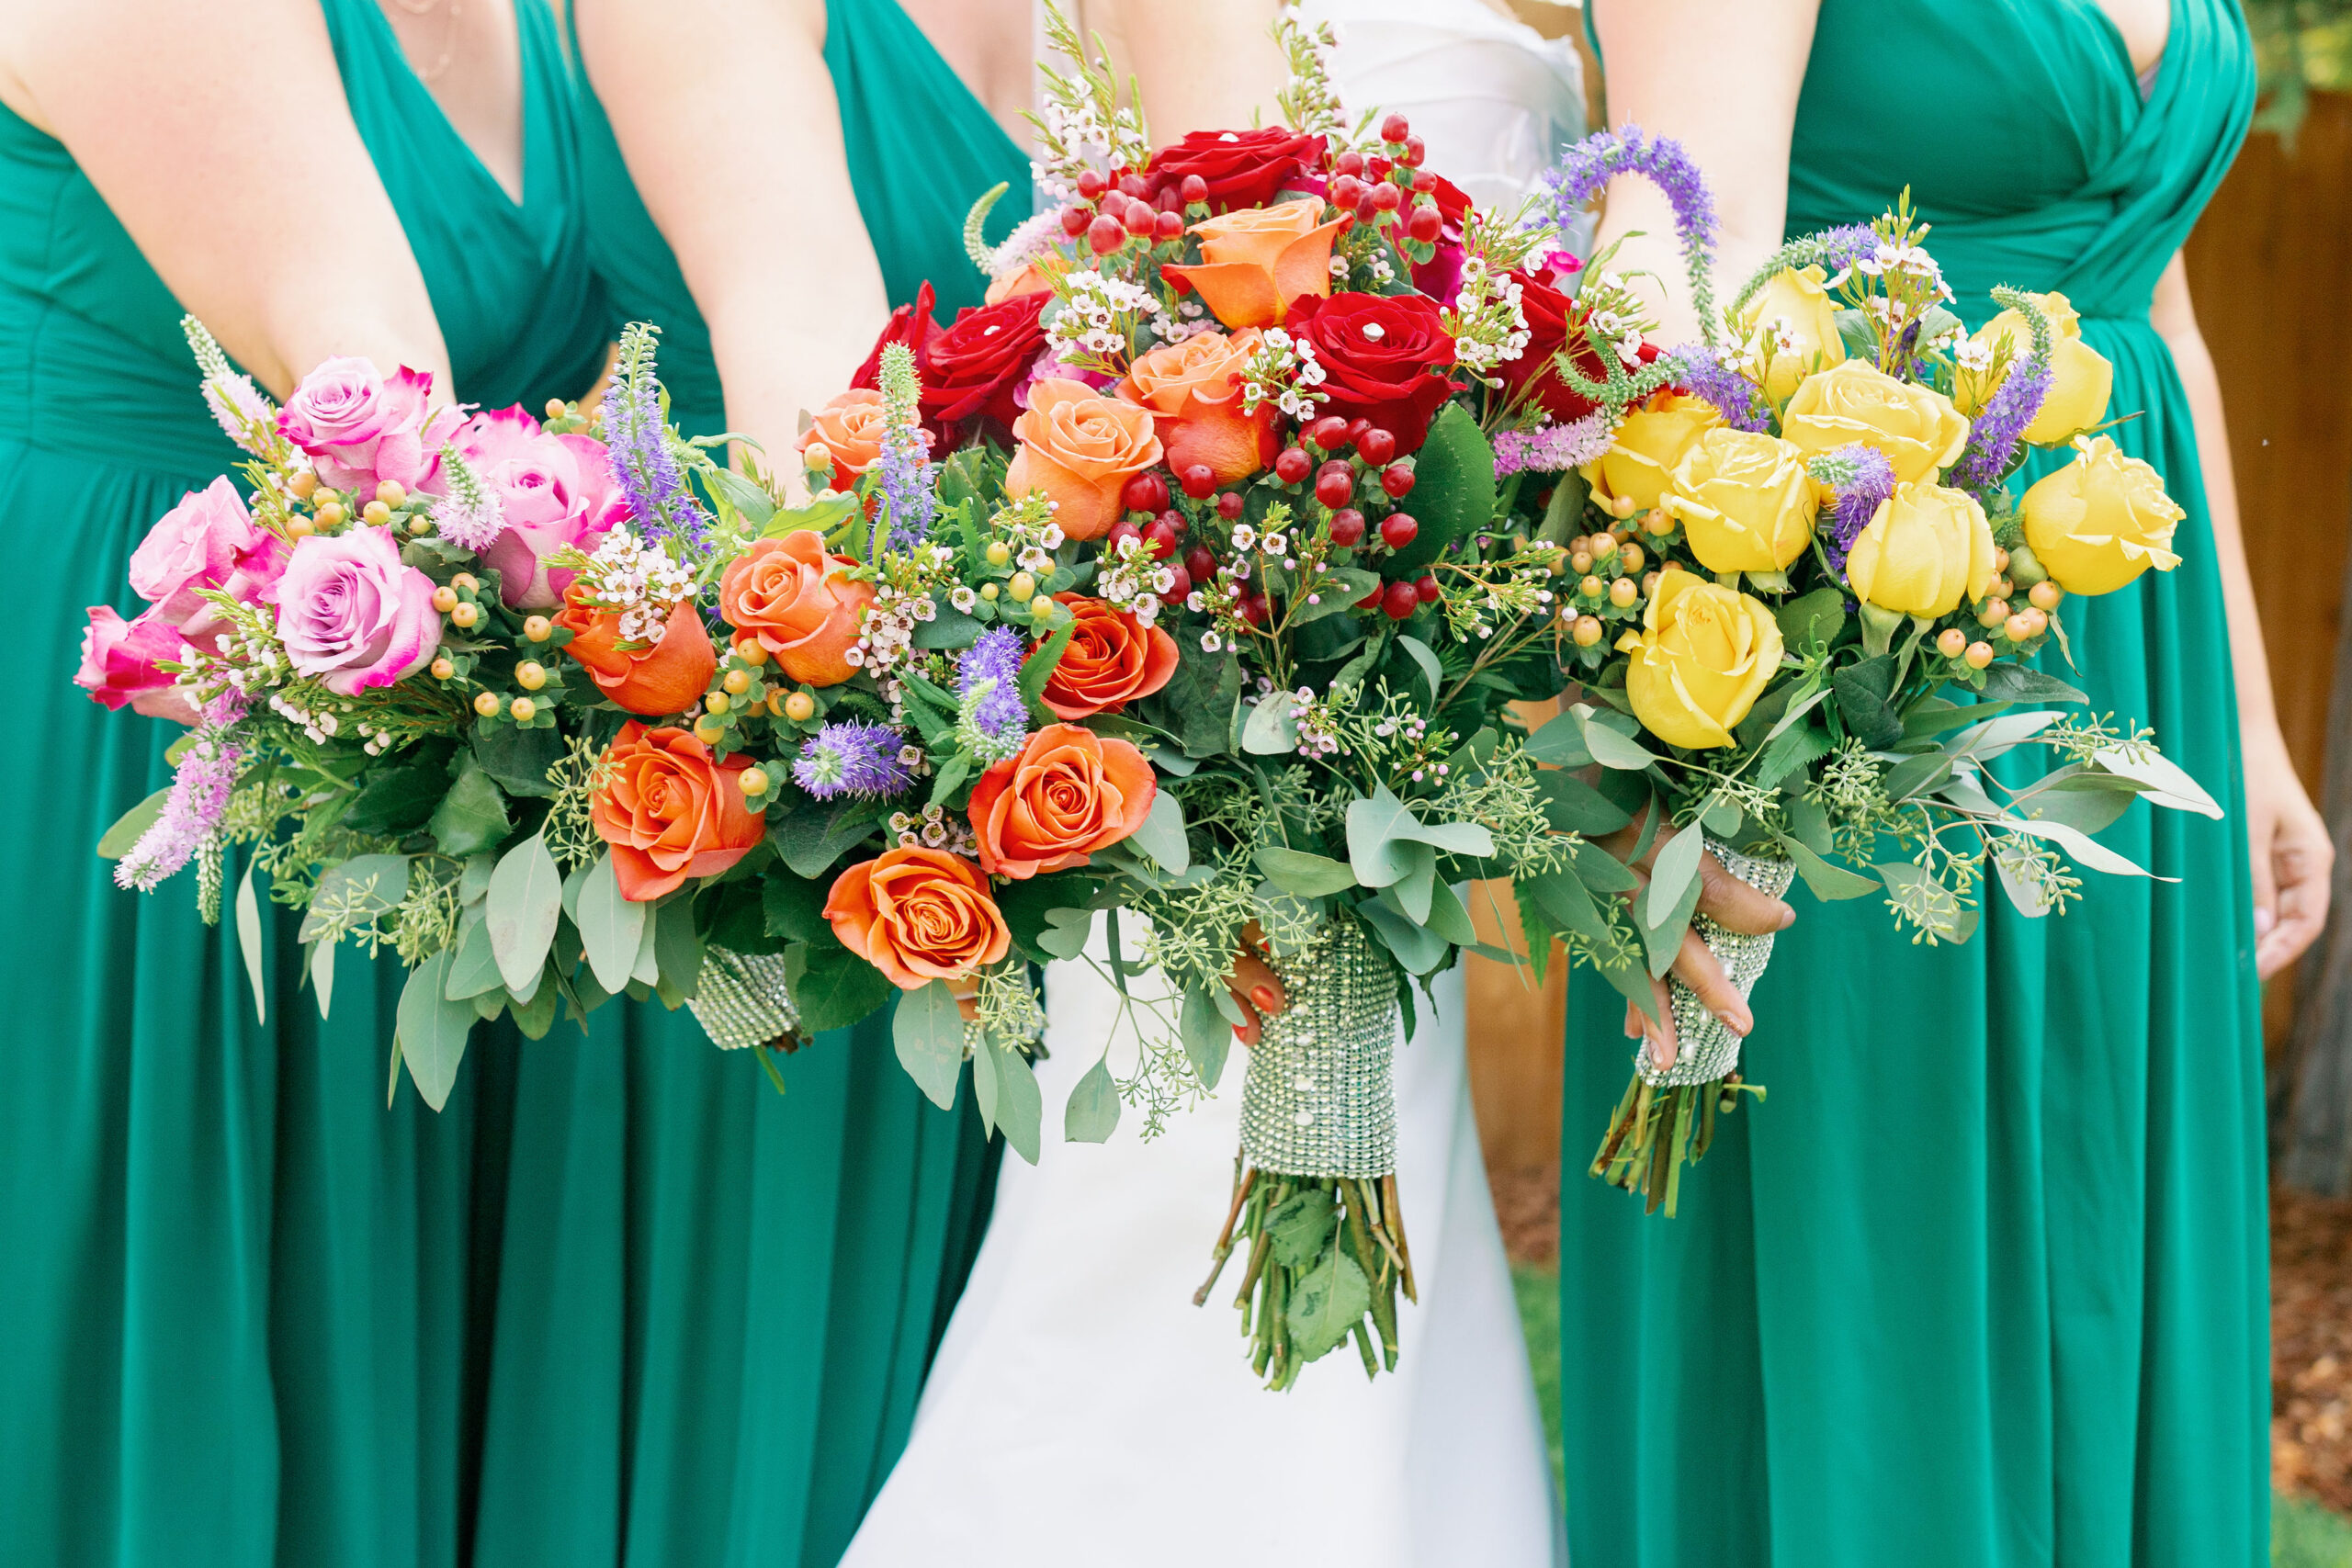 Bay Area wedding photographer captures bride and bridesmaids holding bouquets